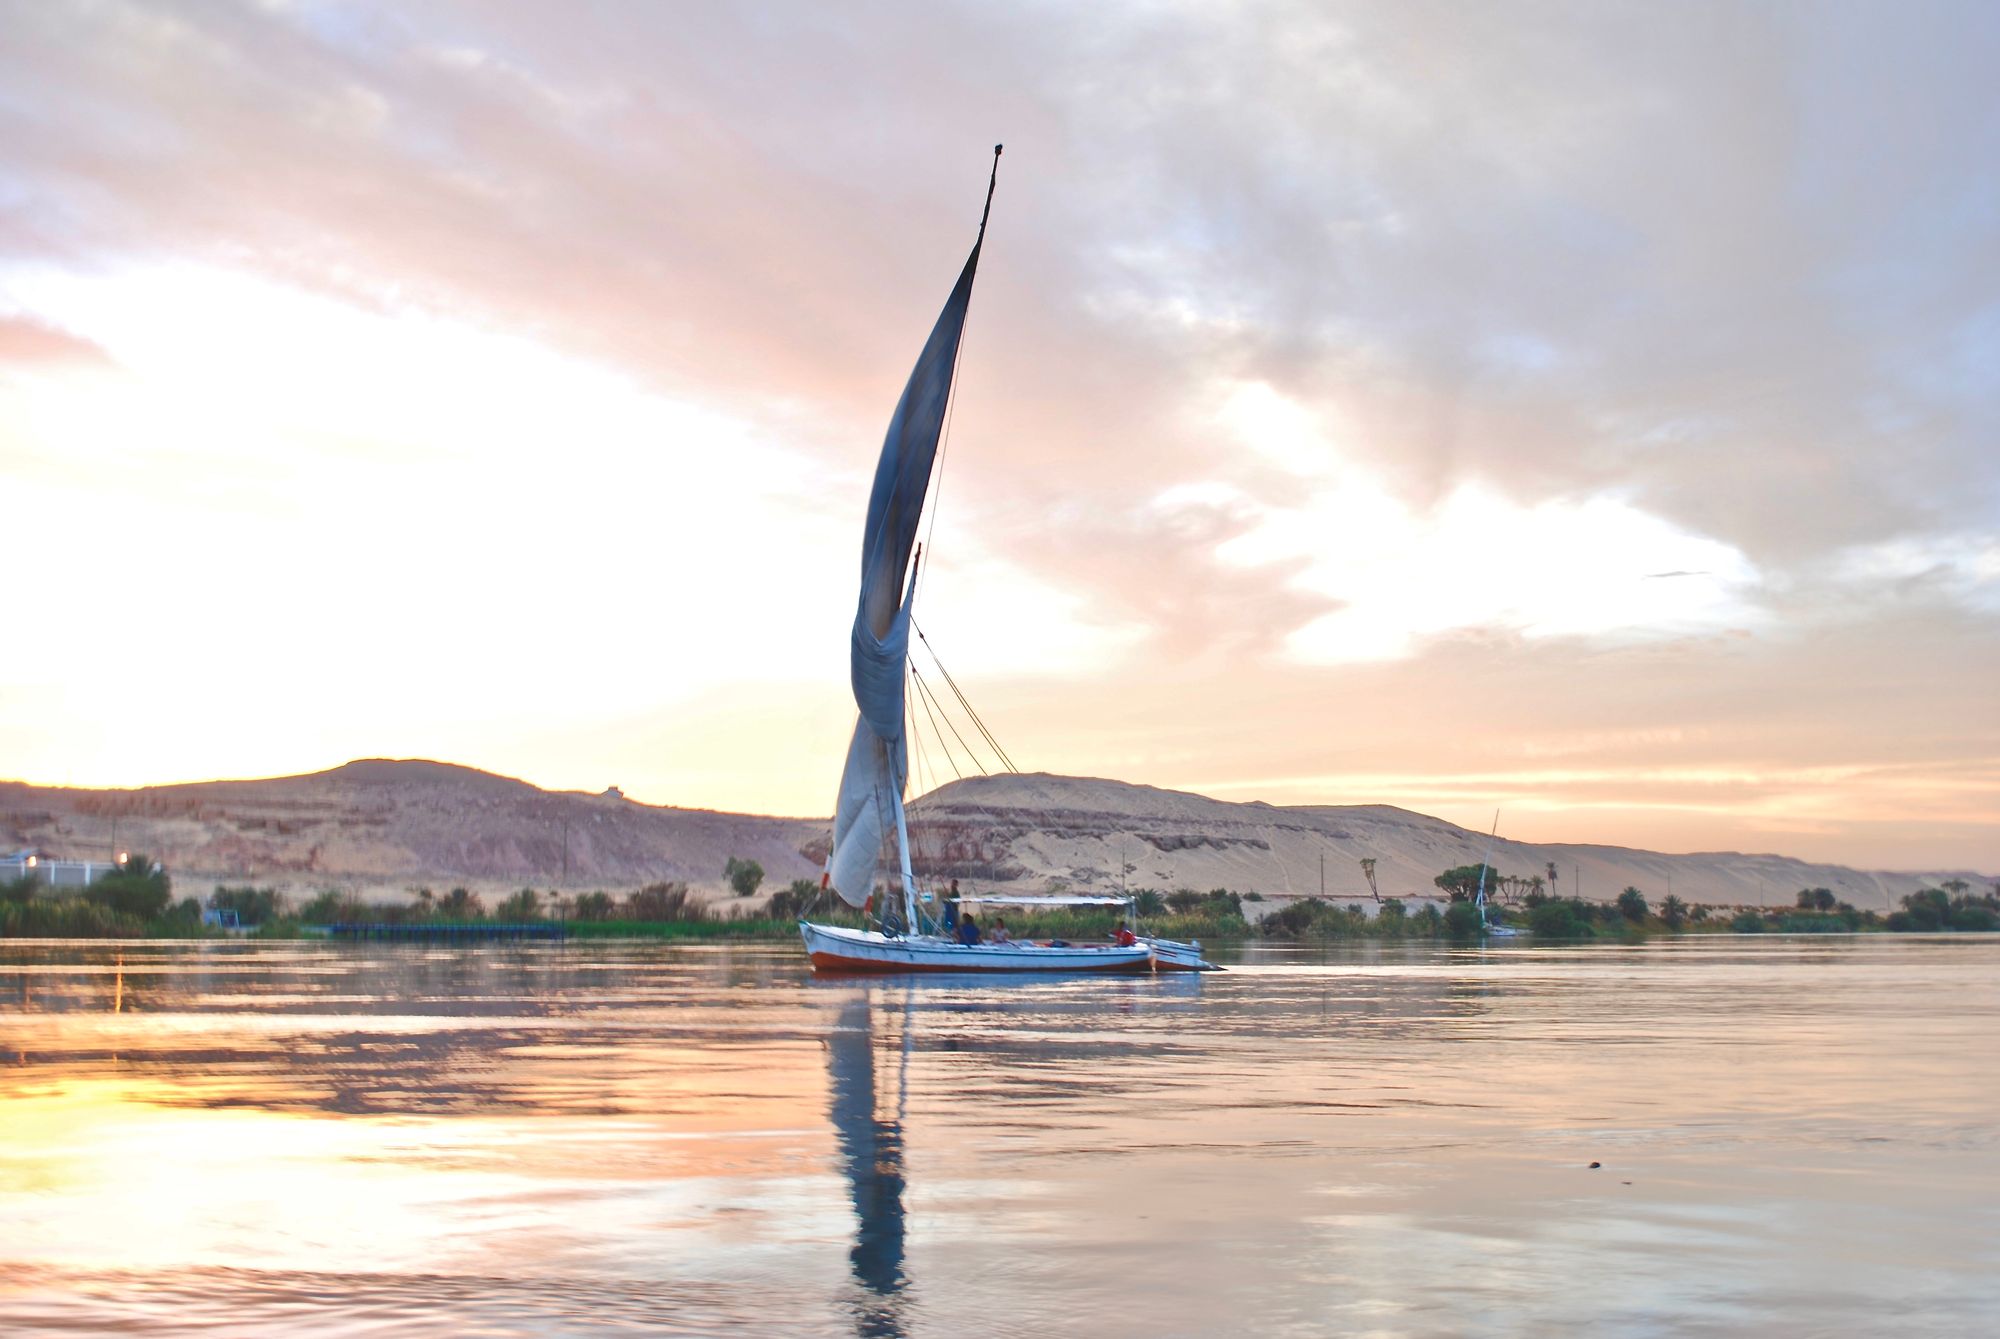 Surviving a Felucca Adventure On the River Nile